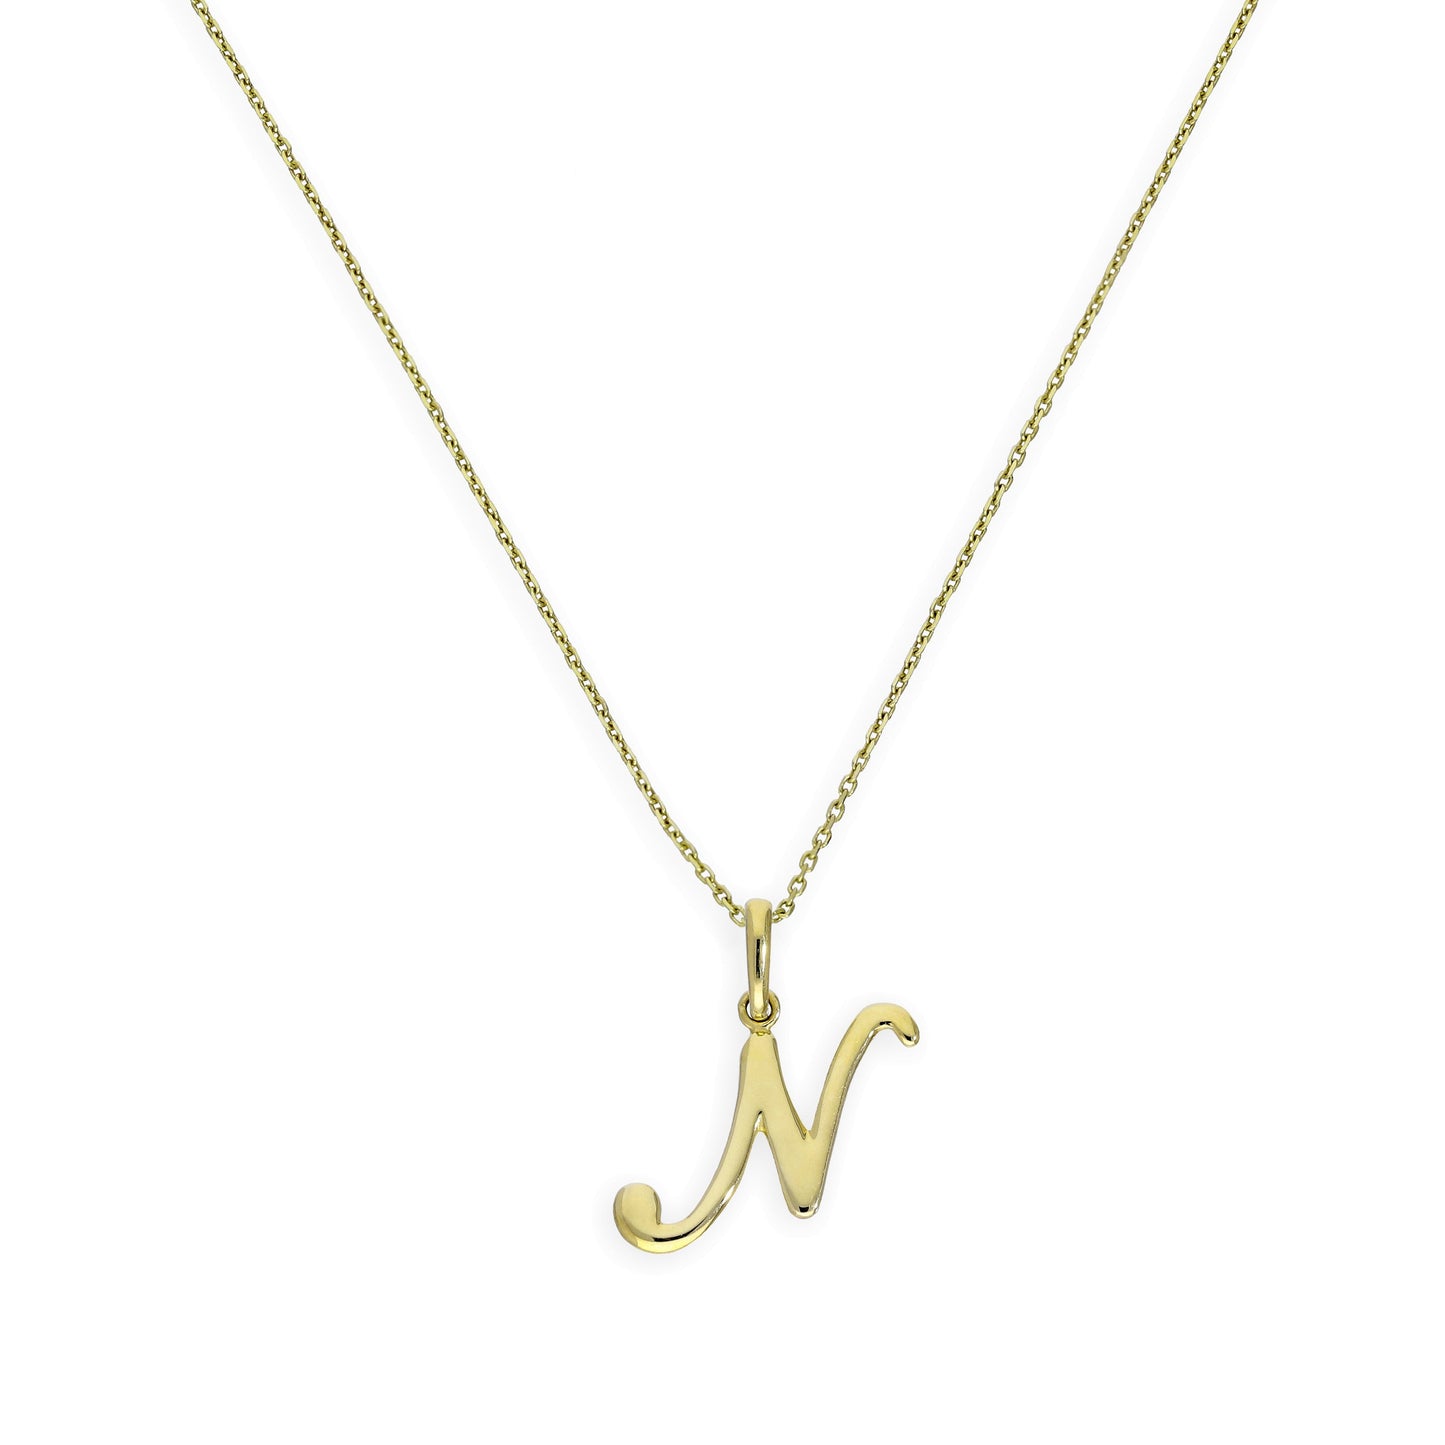 9ct Gold Fancy Calligraphy Script Letter N Pendant Necklace 16 - 20 Inches